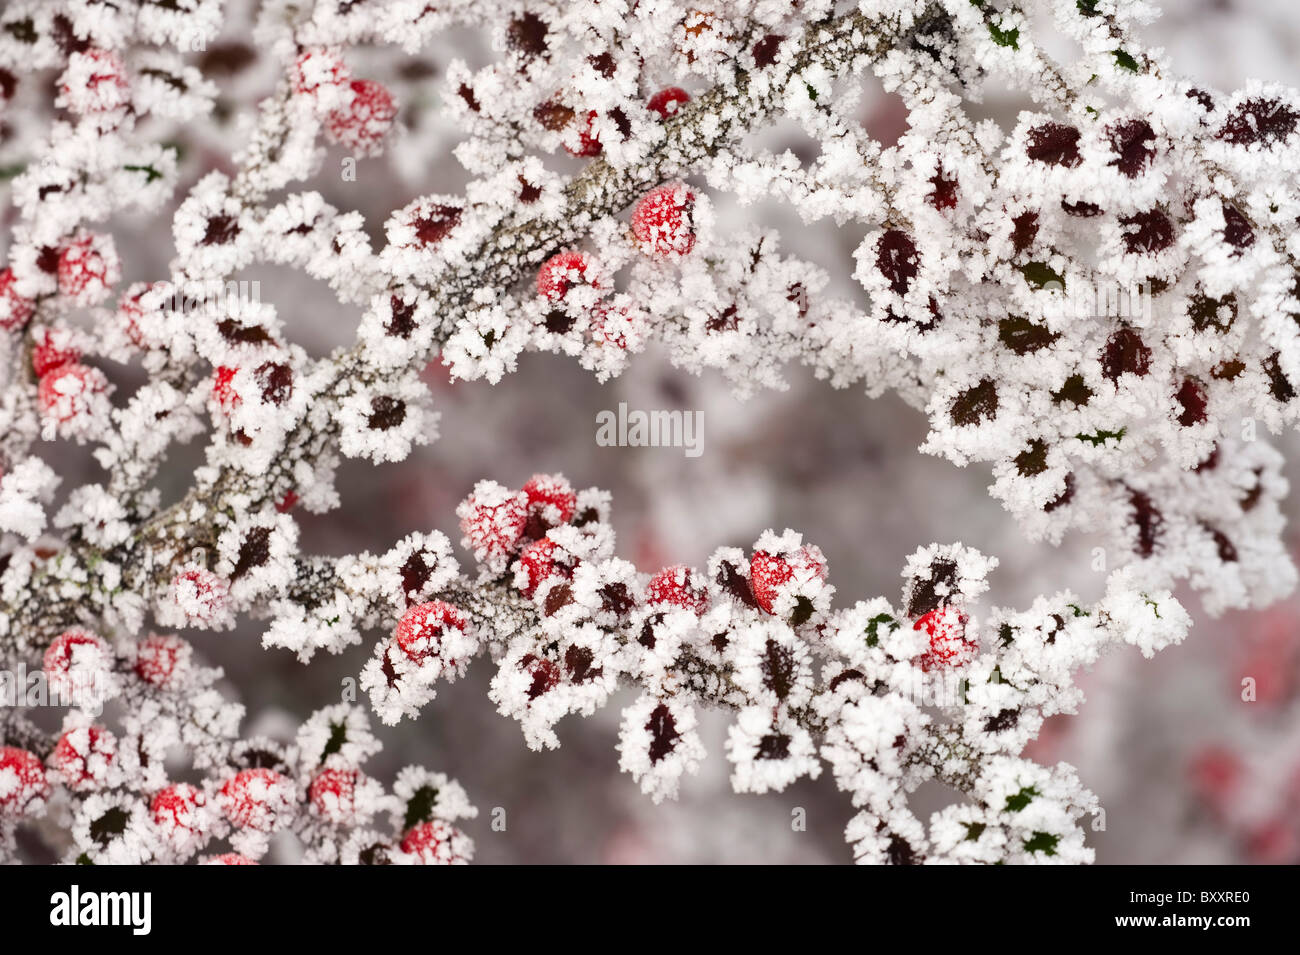 Cotoneaster leaves and berries covered by a hoar frost in winter Stock Photo